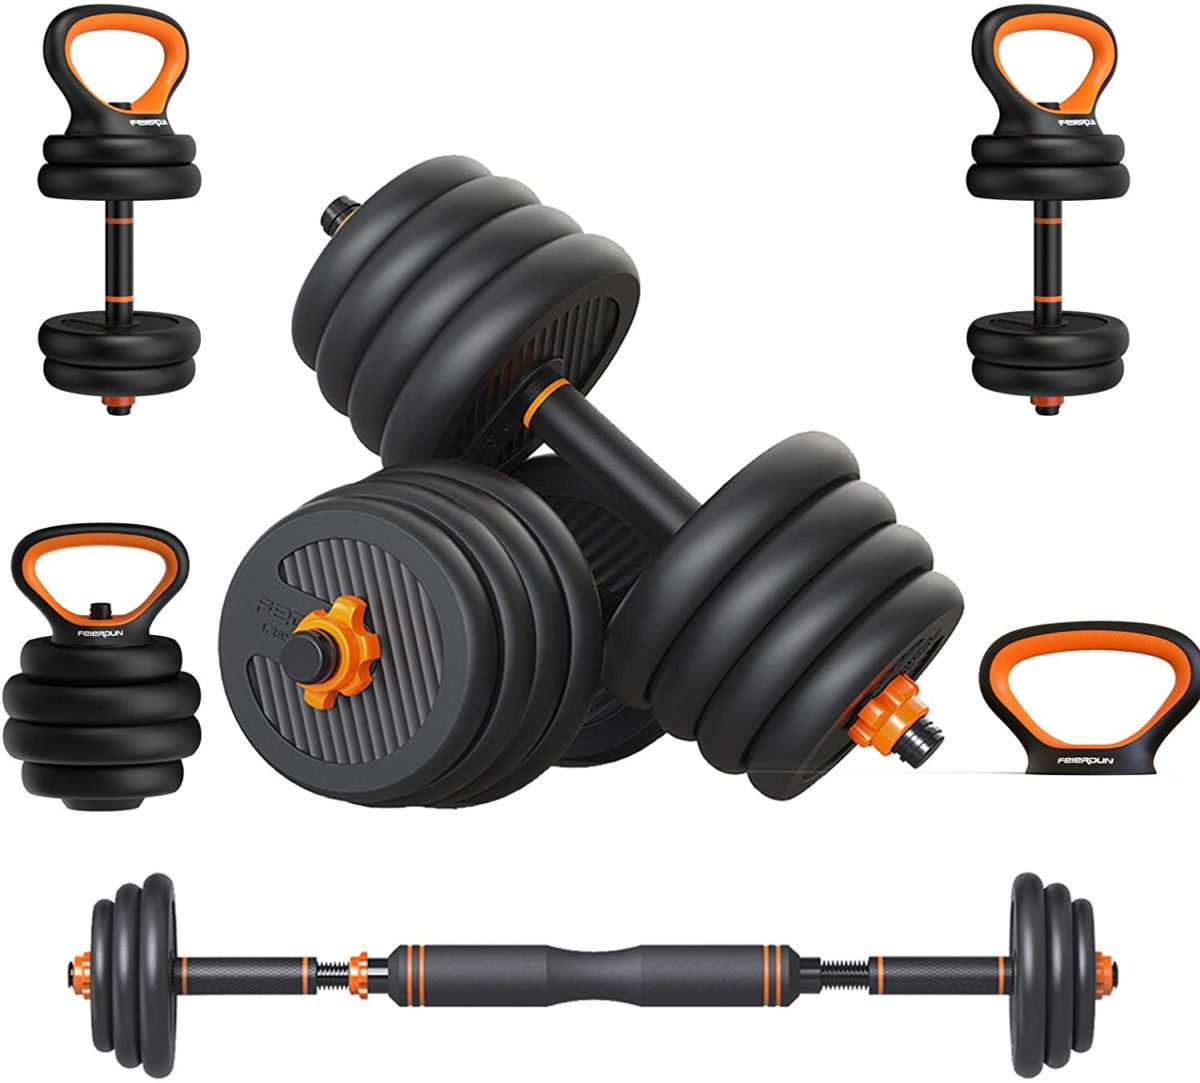 39 pieces of workout equipment you can buy online to upgrade your home gym | let this list of workout equipment help you build your at-home gym